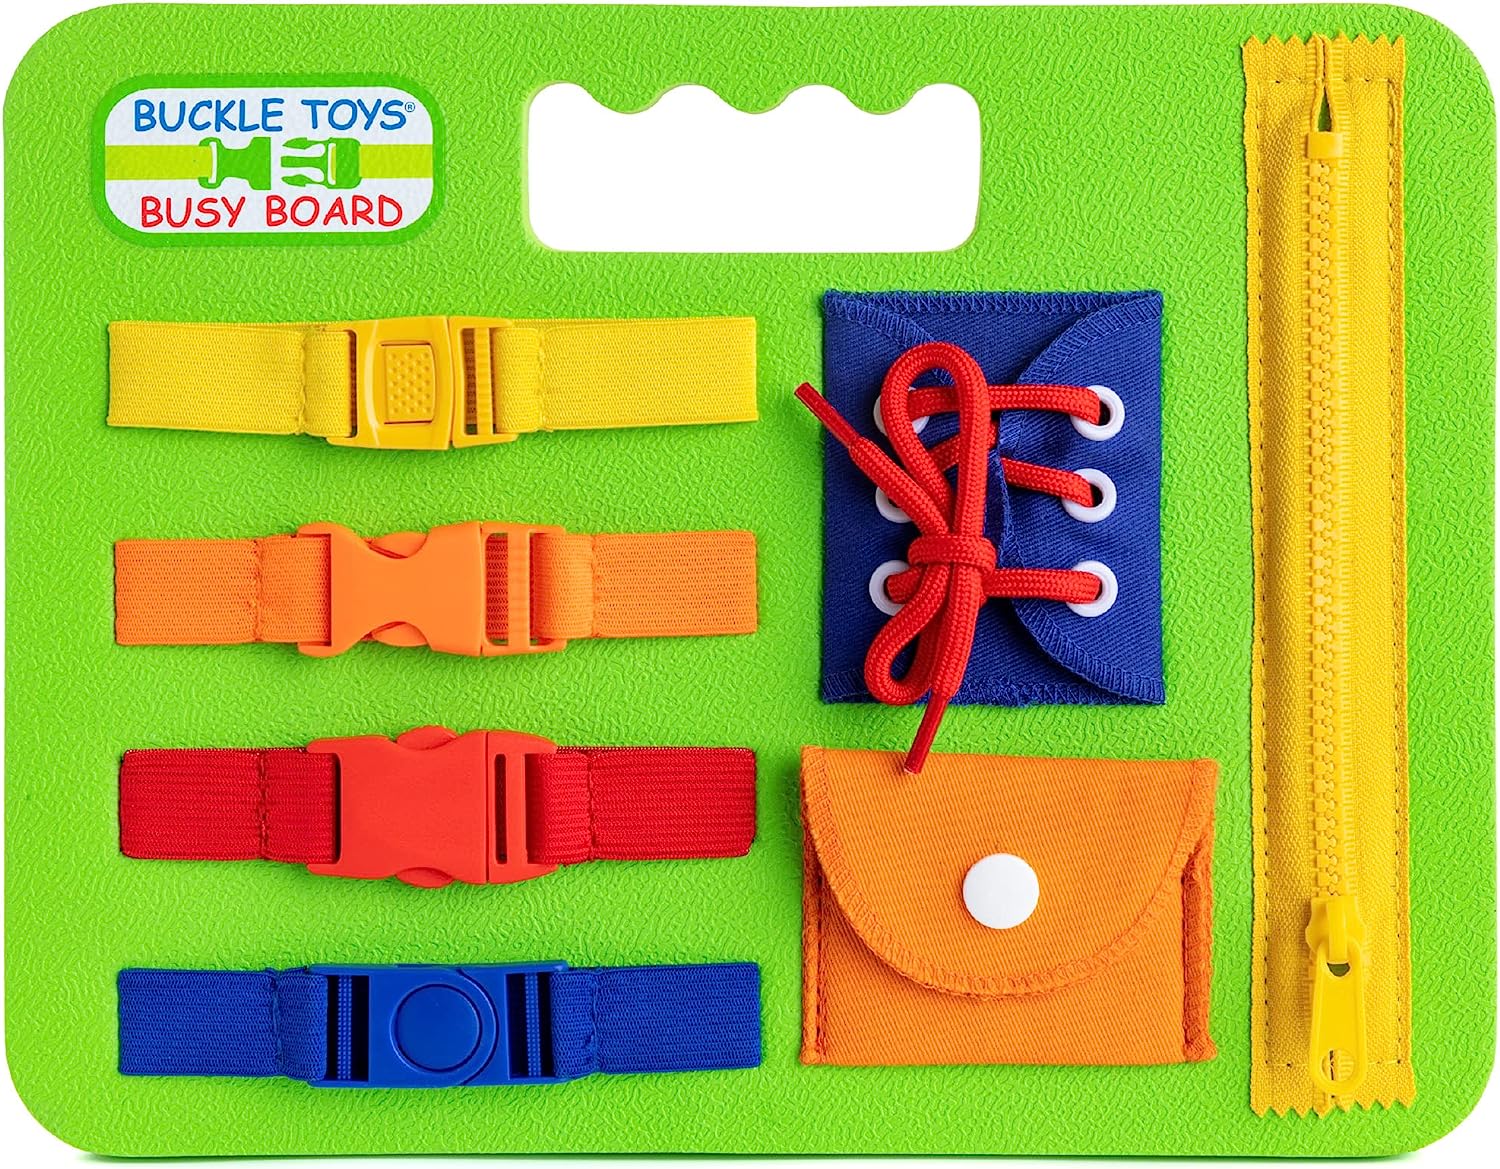 Buckle Toys Busy Board with yellow orange red blue buckles yellow zipper orange pouch red laces